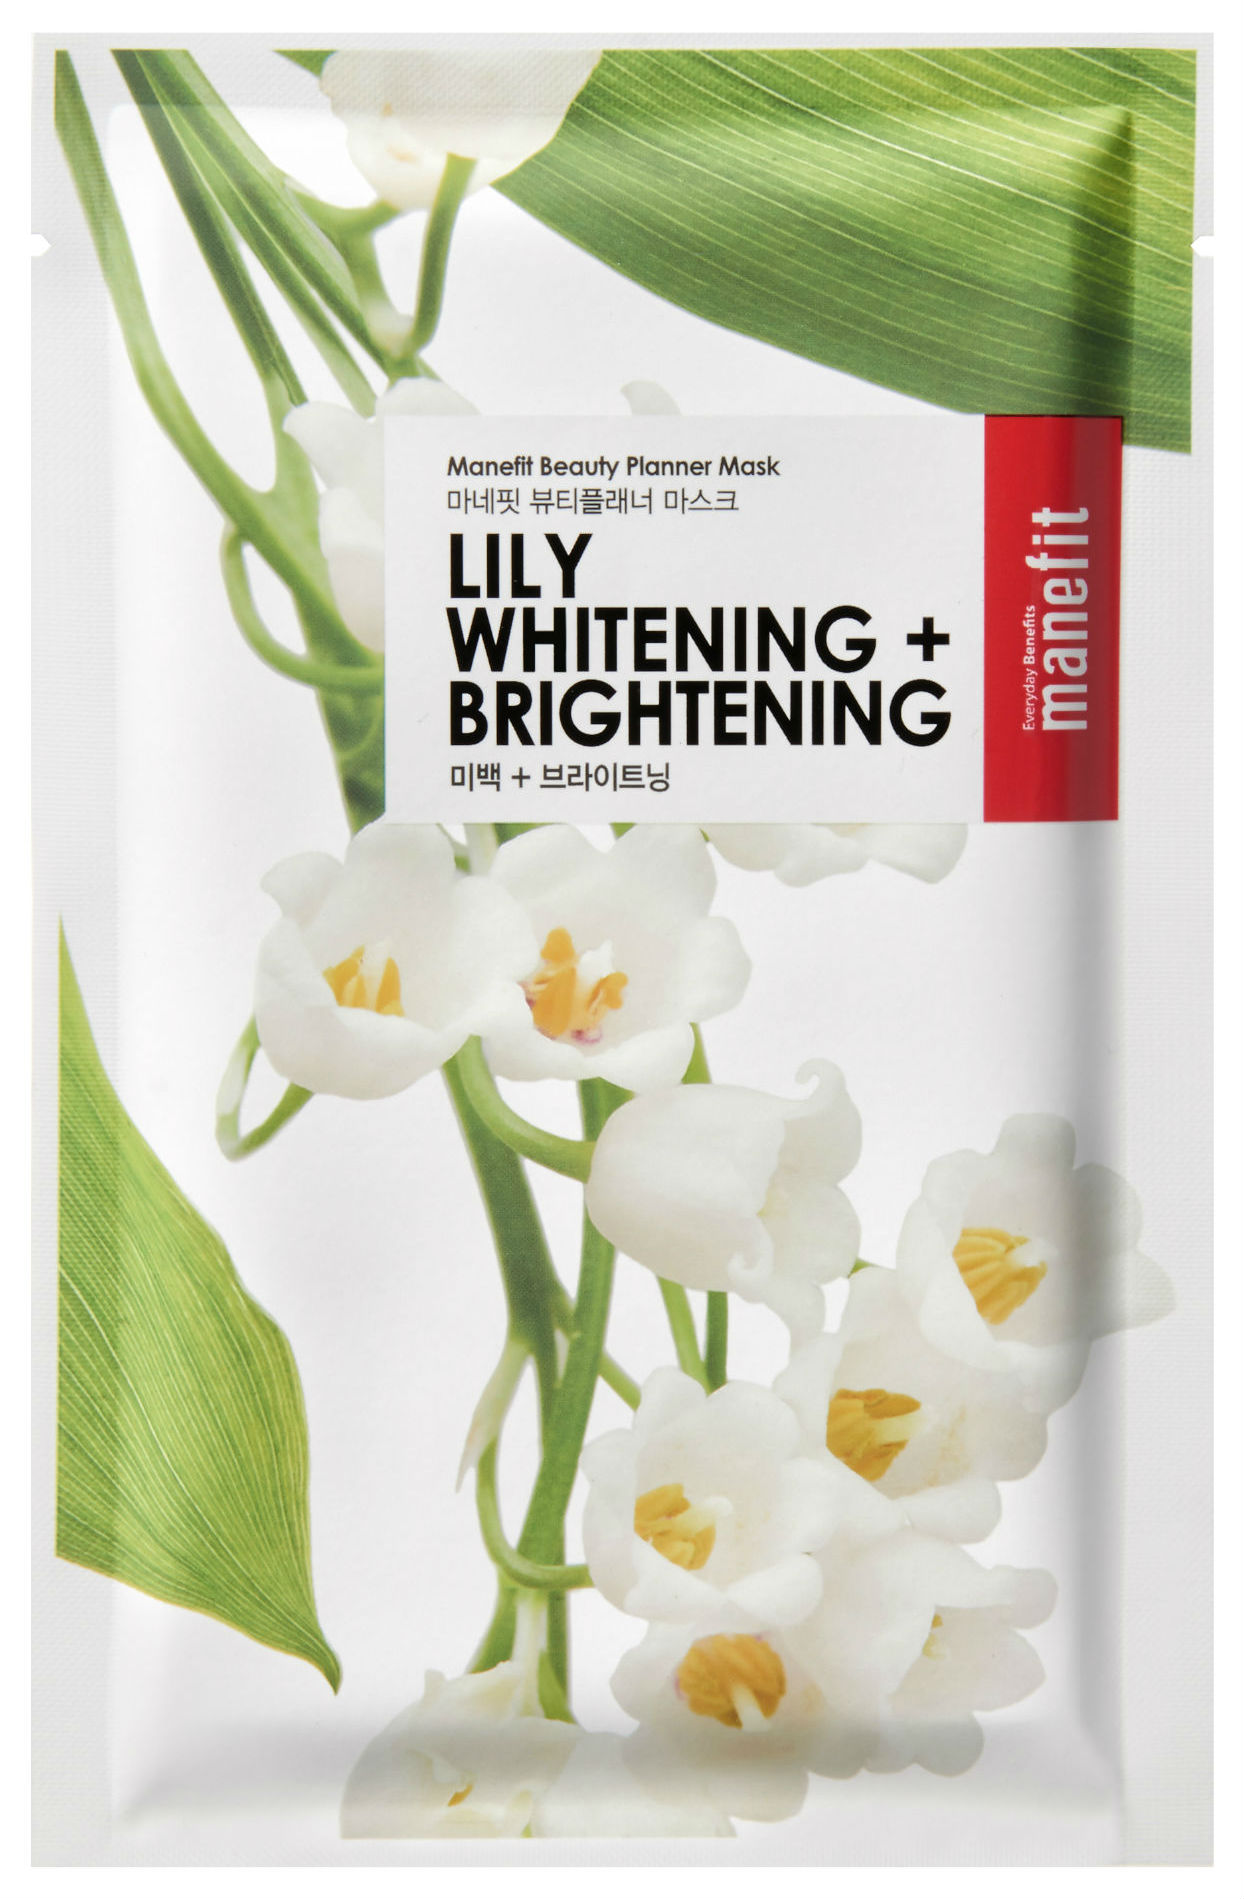 фото Маска для лица manefit beauty planner lily whitening and brightening mask 20 мл